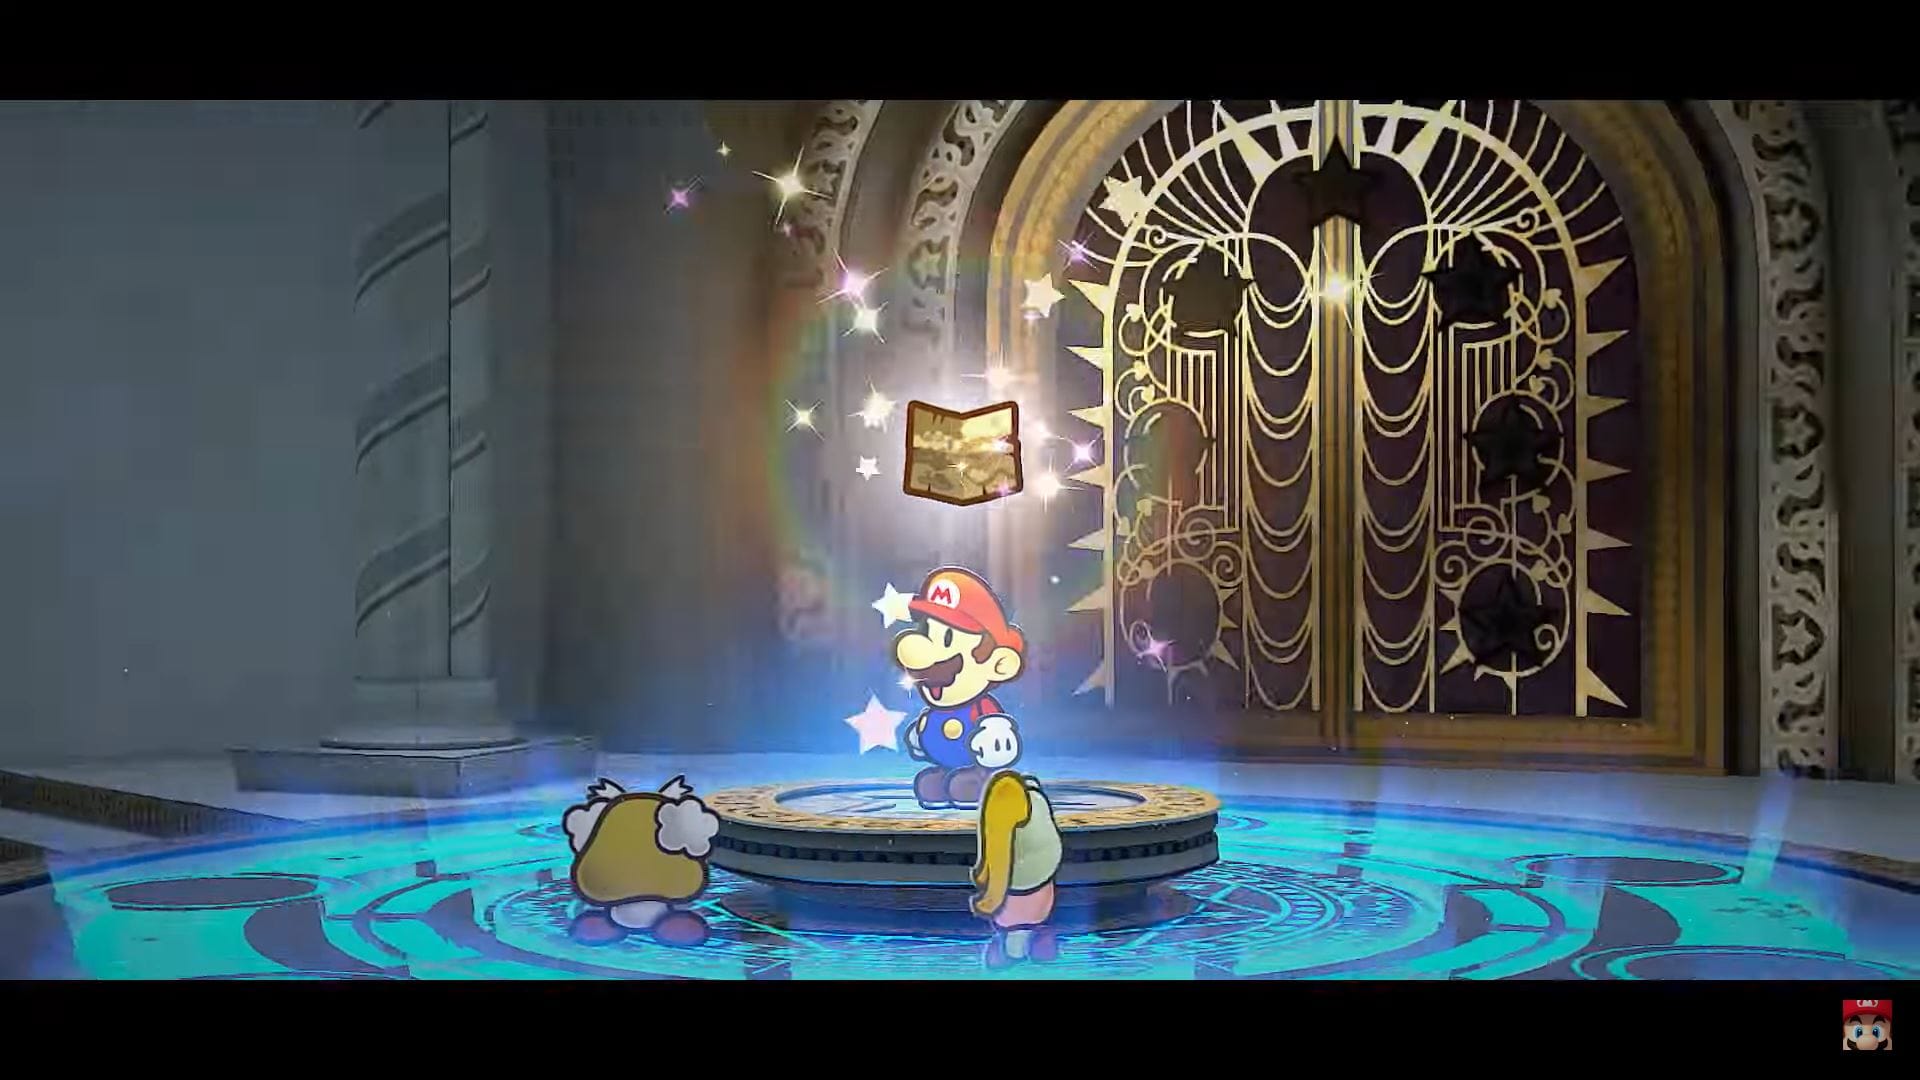 Paper Mario The Thousand Year Door Switch Version Announced At Today's ...